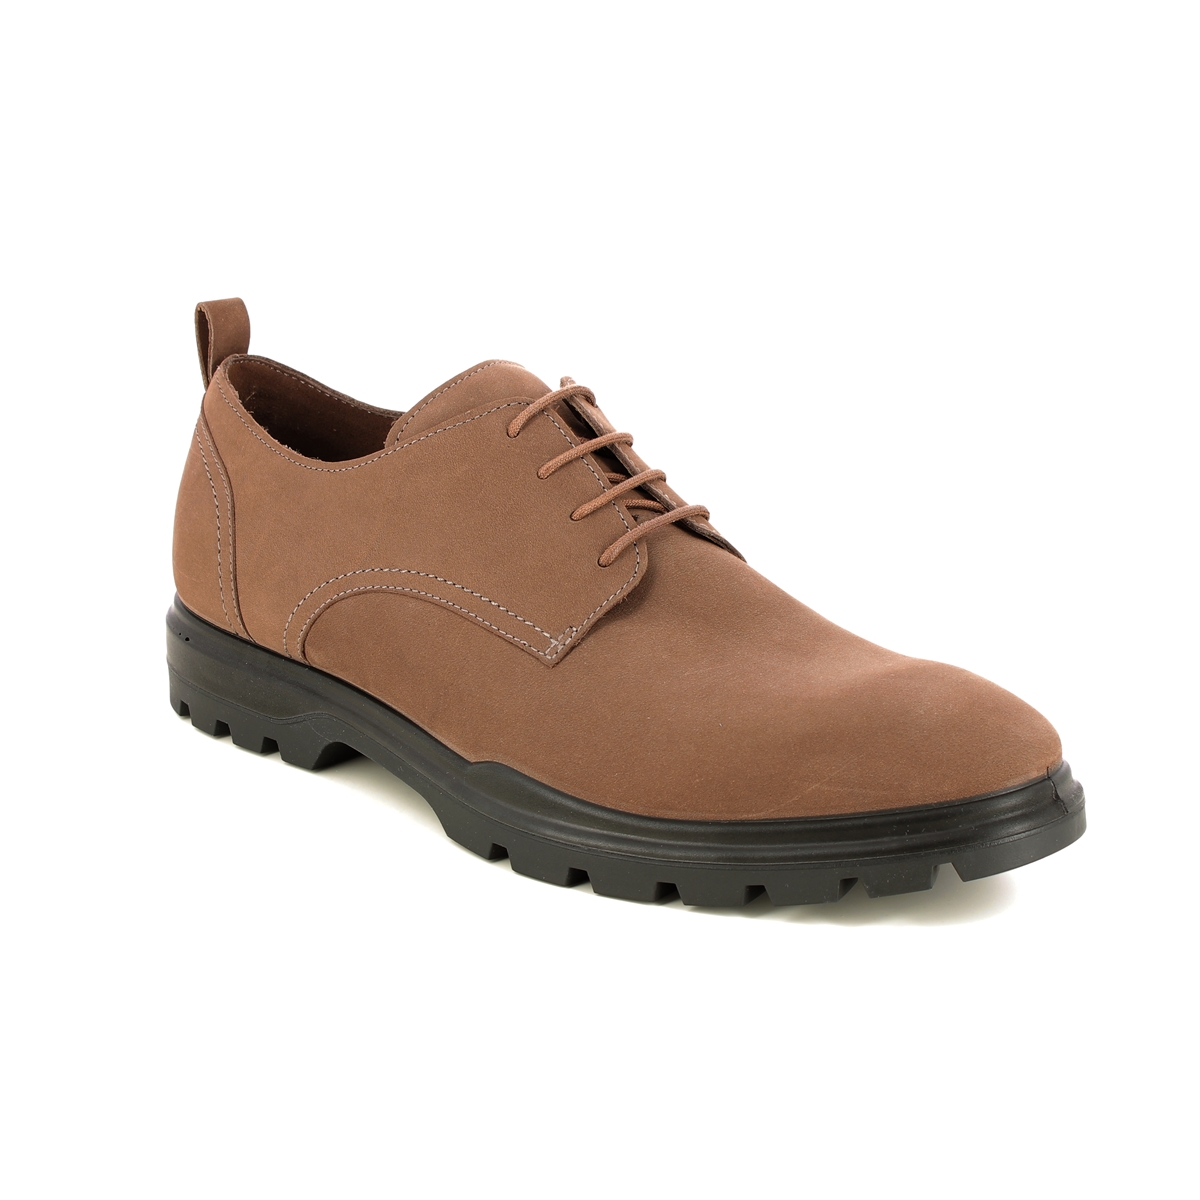 ECCO Citytray Avant Brown nubuck Mens comfort shoes 521864-02175 in a Plain Leather in Size 46